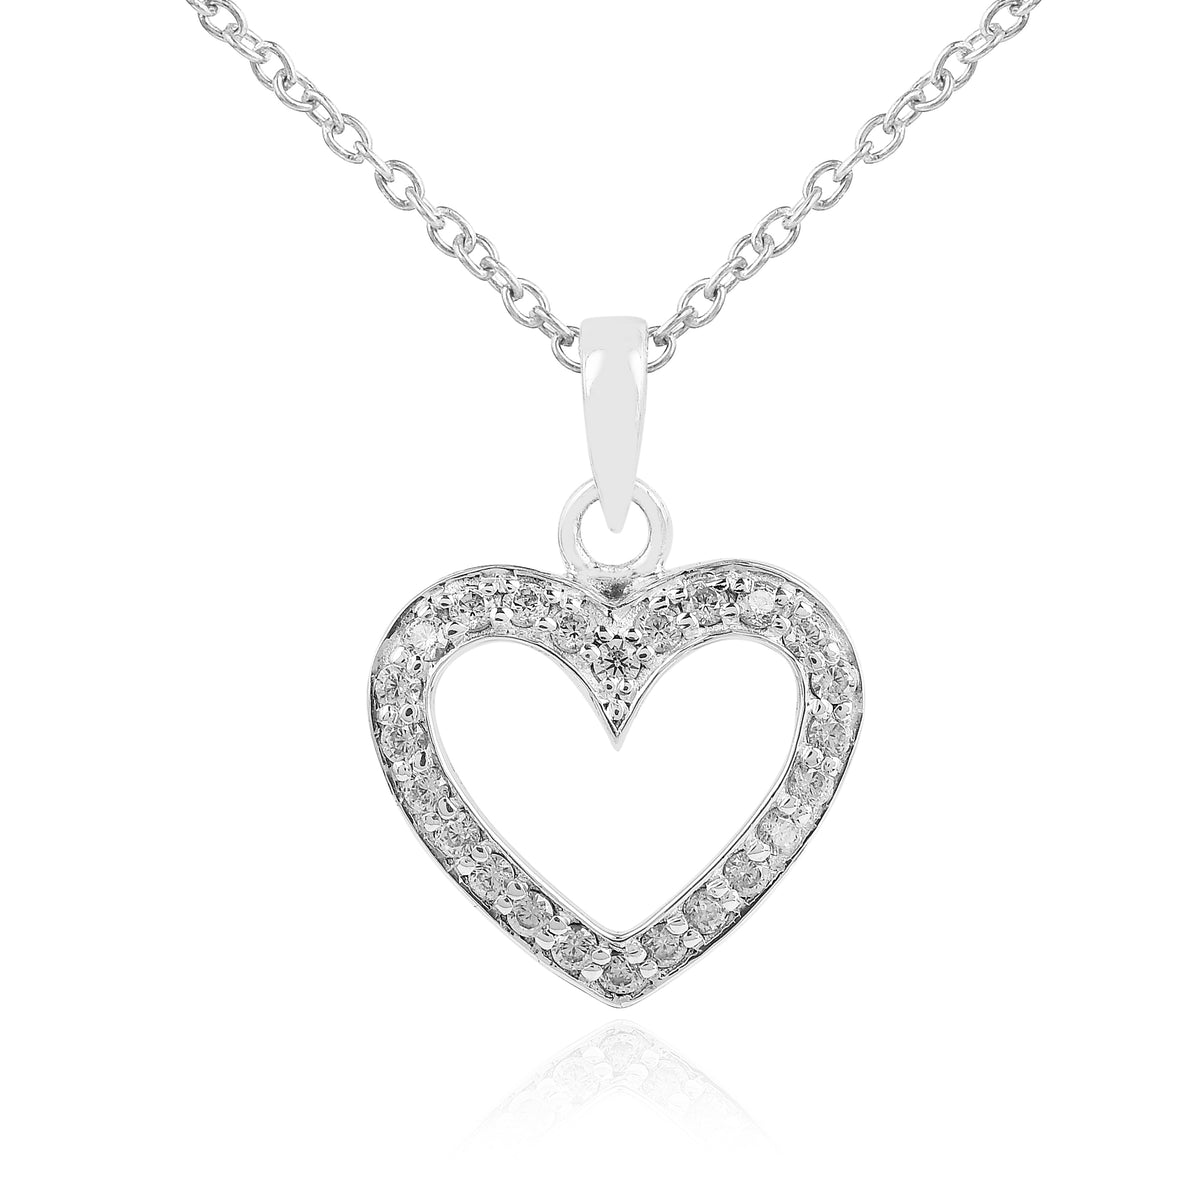 925 Sterling Silver Cozy Heart Pendant with Chain Gift for Her